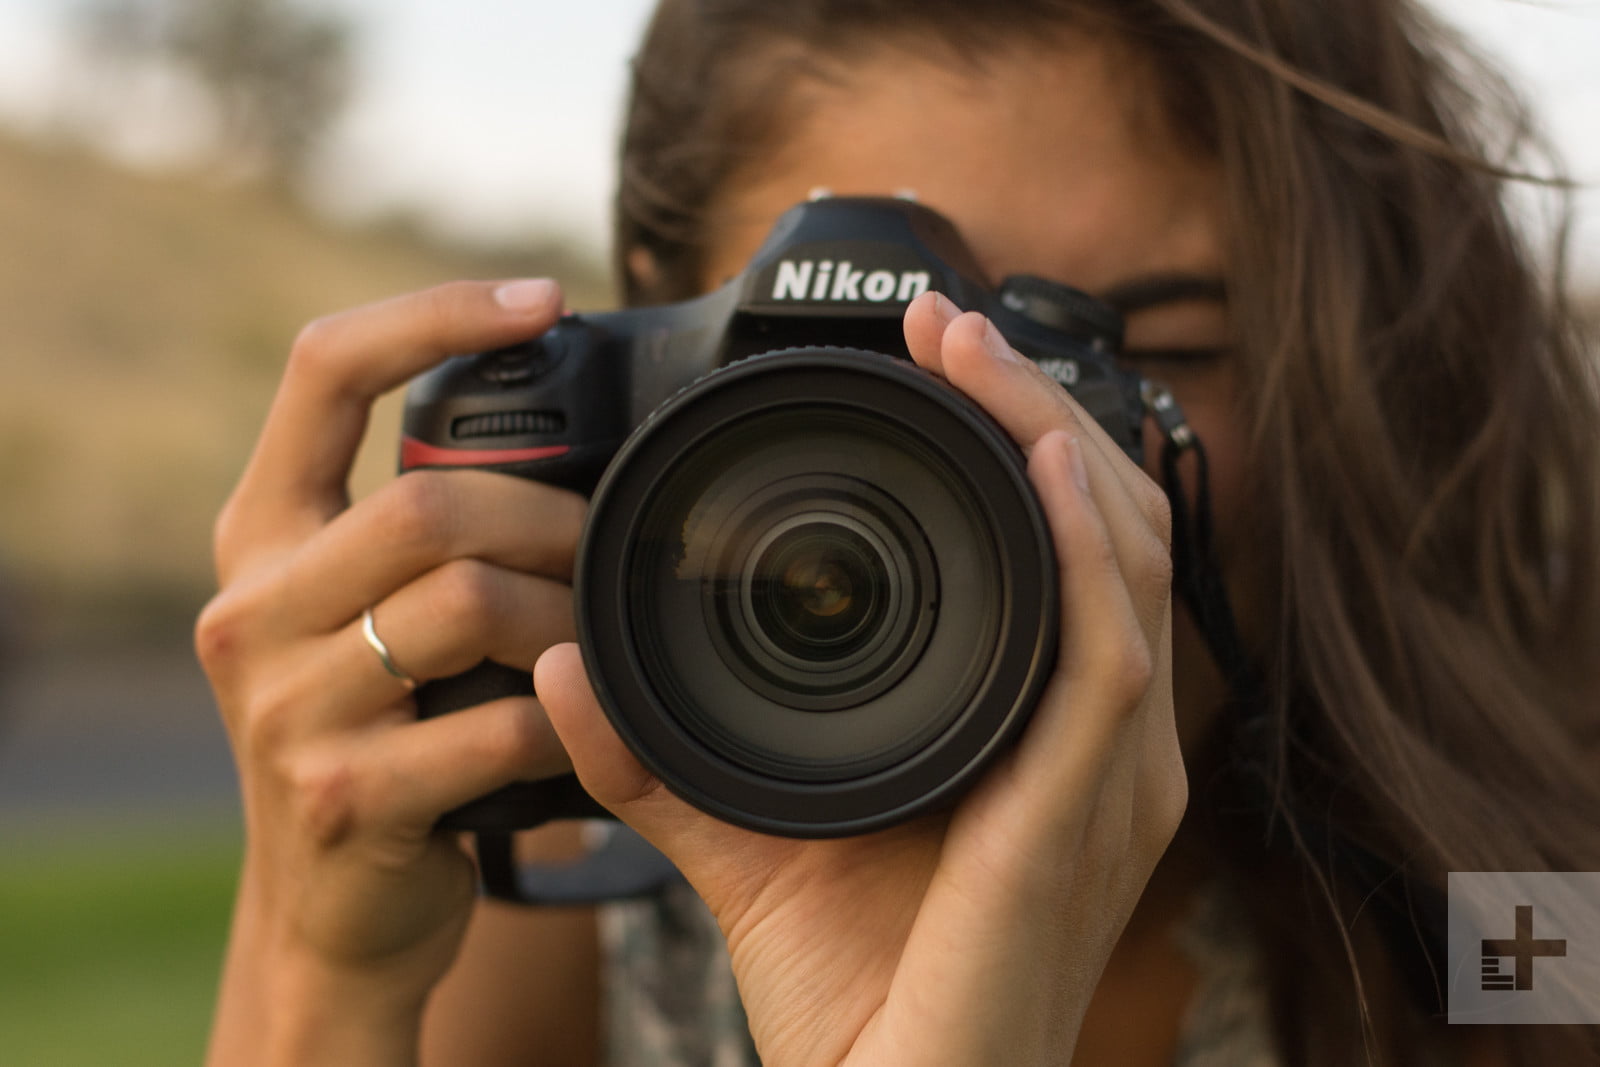 ARE YOU LOOKING FOR THE BEST SLR CAMERA BRAND?